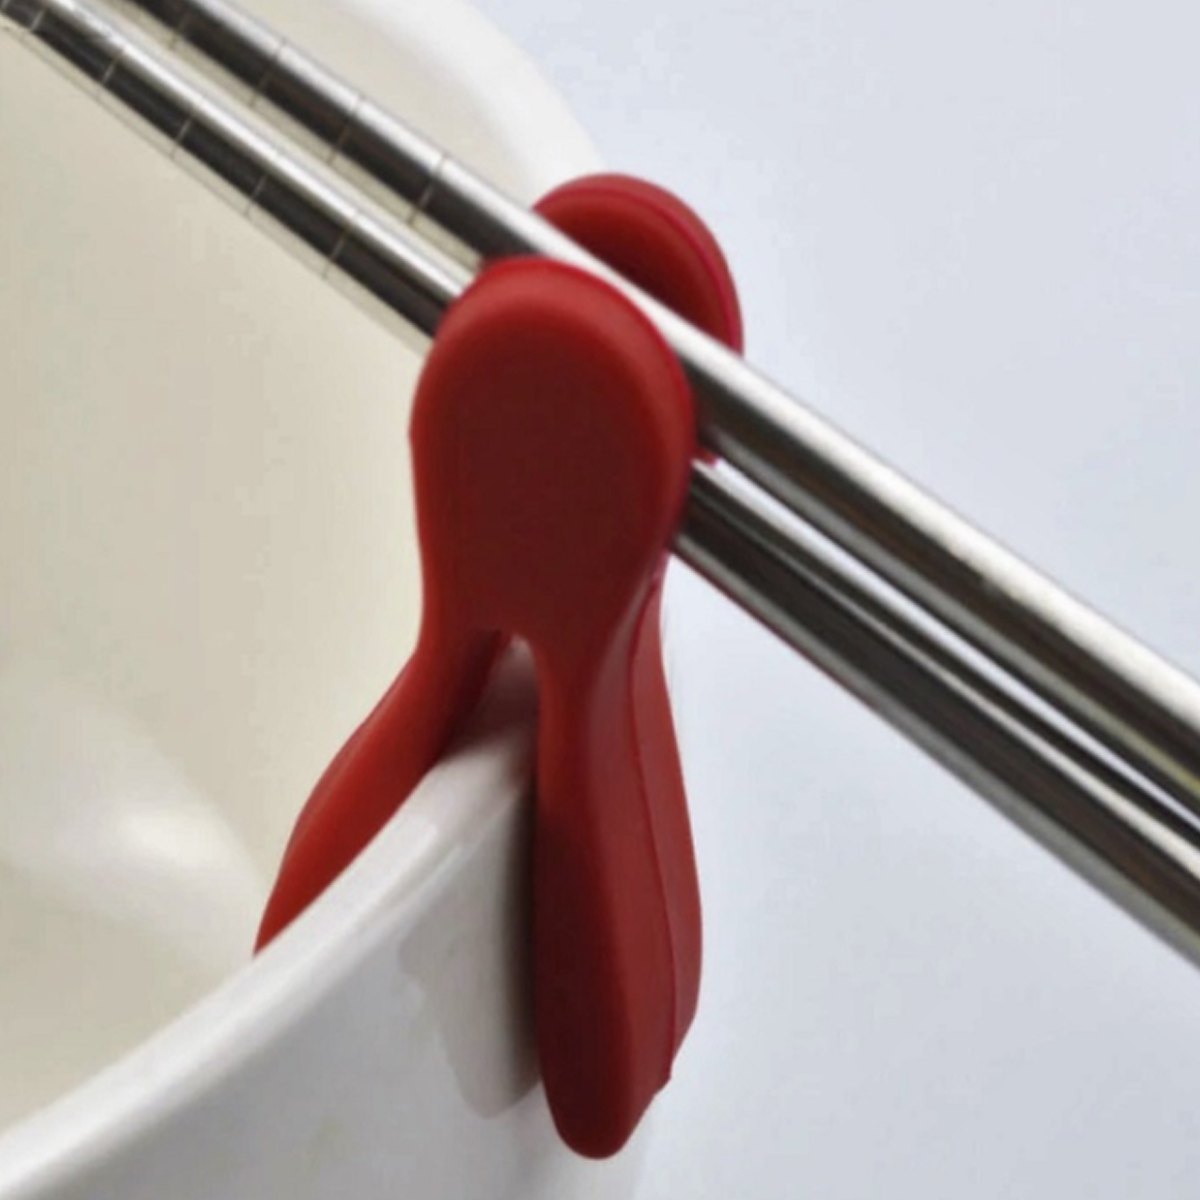 Spoon / Spatula holder for All Types Of Pan